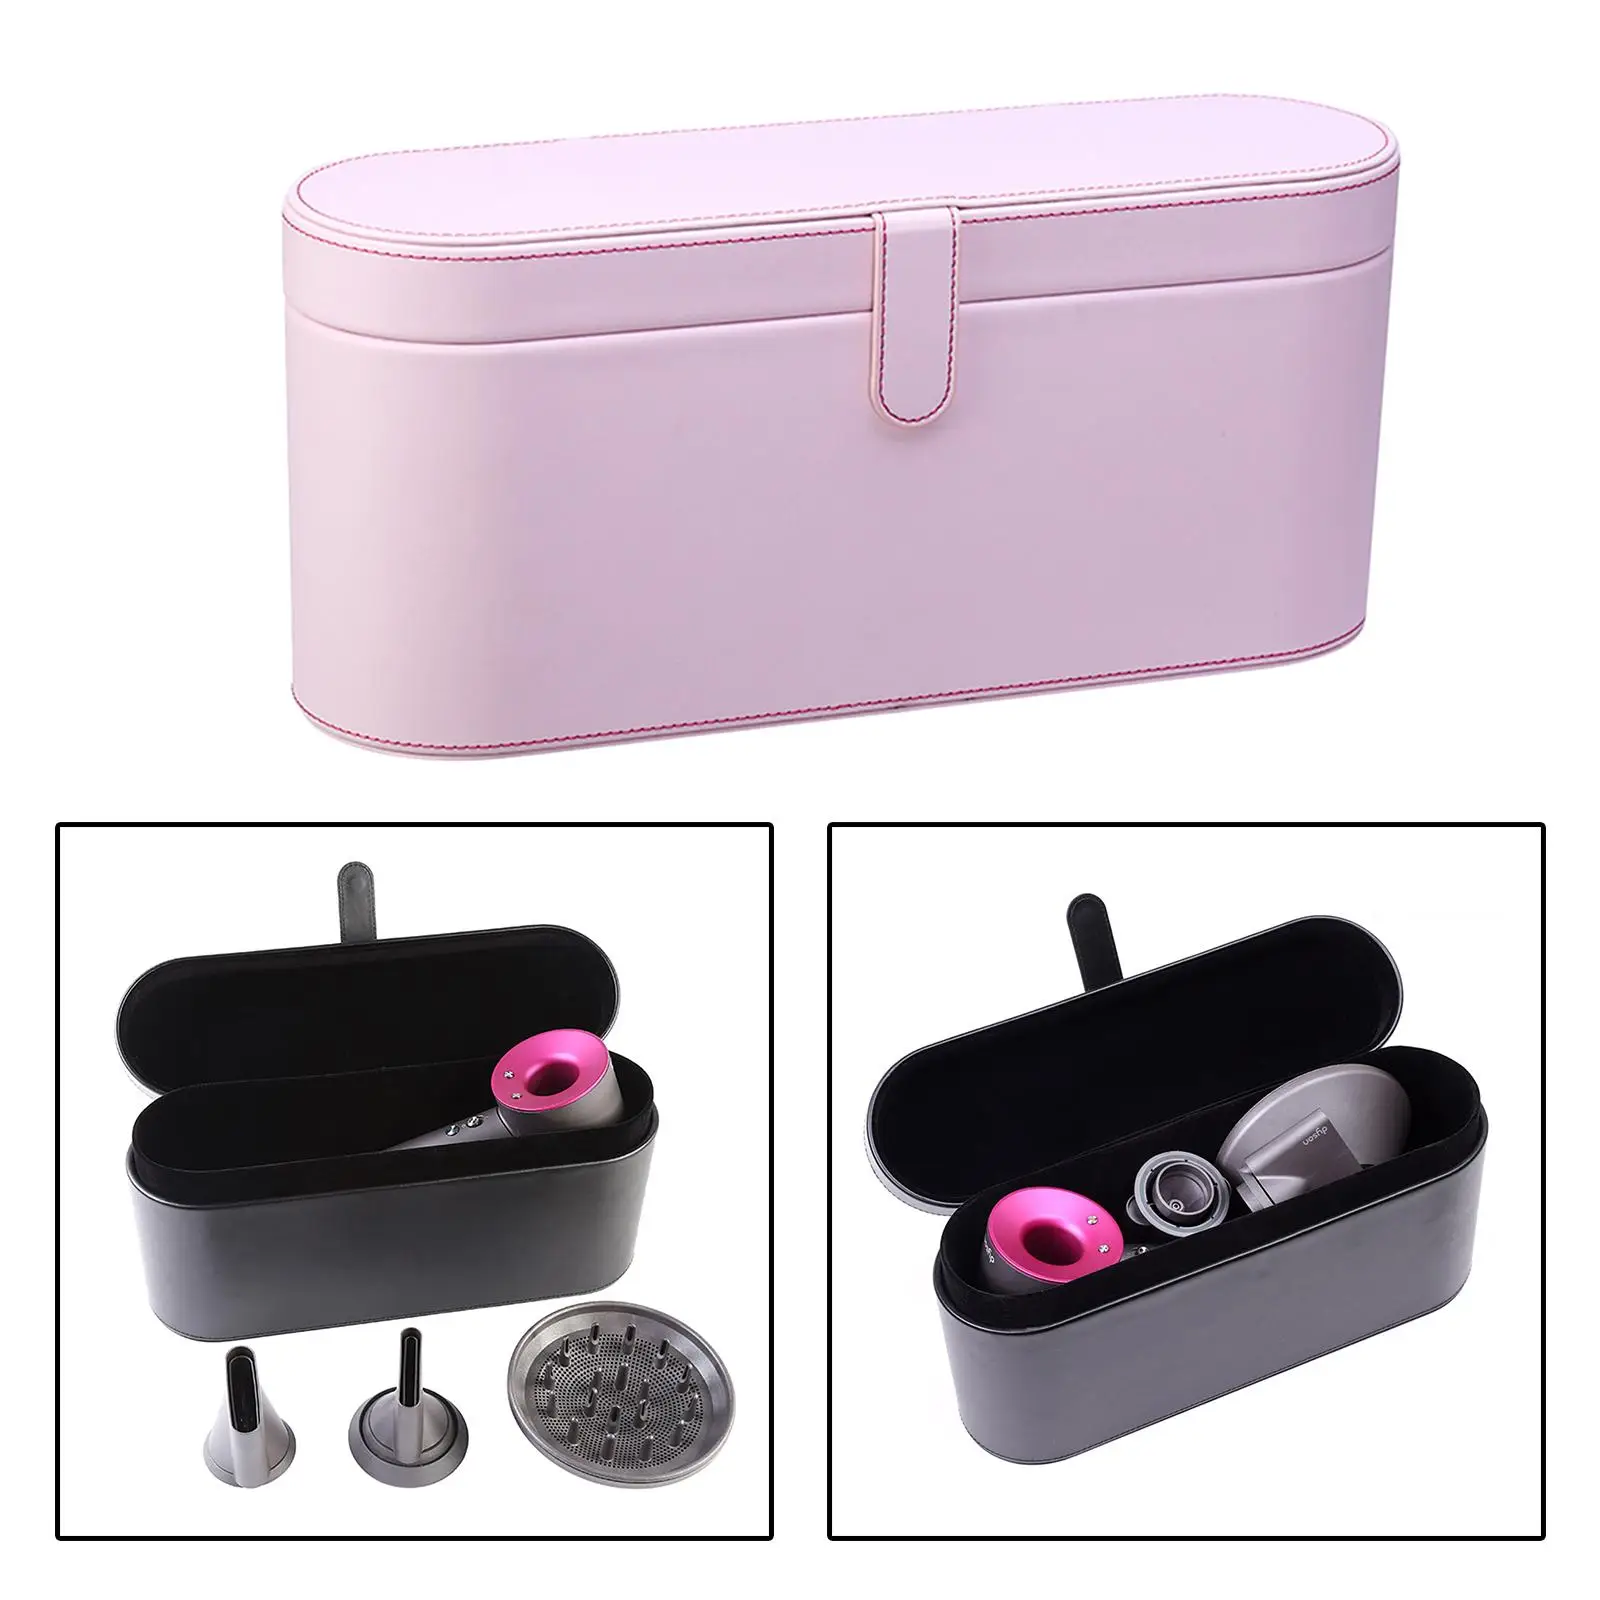 Portable PU Leather Travel Case Hair Dryer Storage Box HD03 Fits Hot Air Brush Accessories Magnetic Flip Organizer Carrier